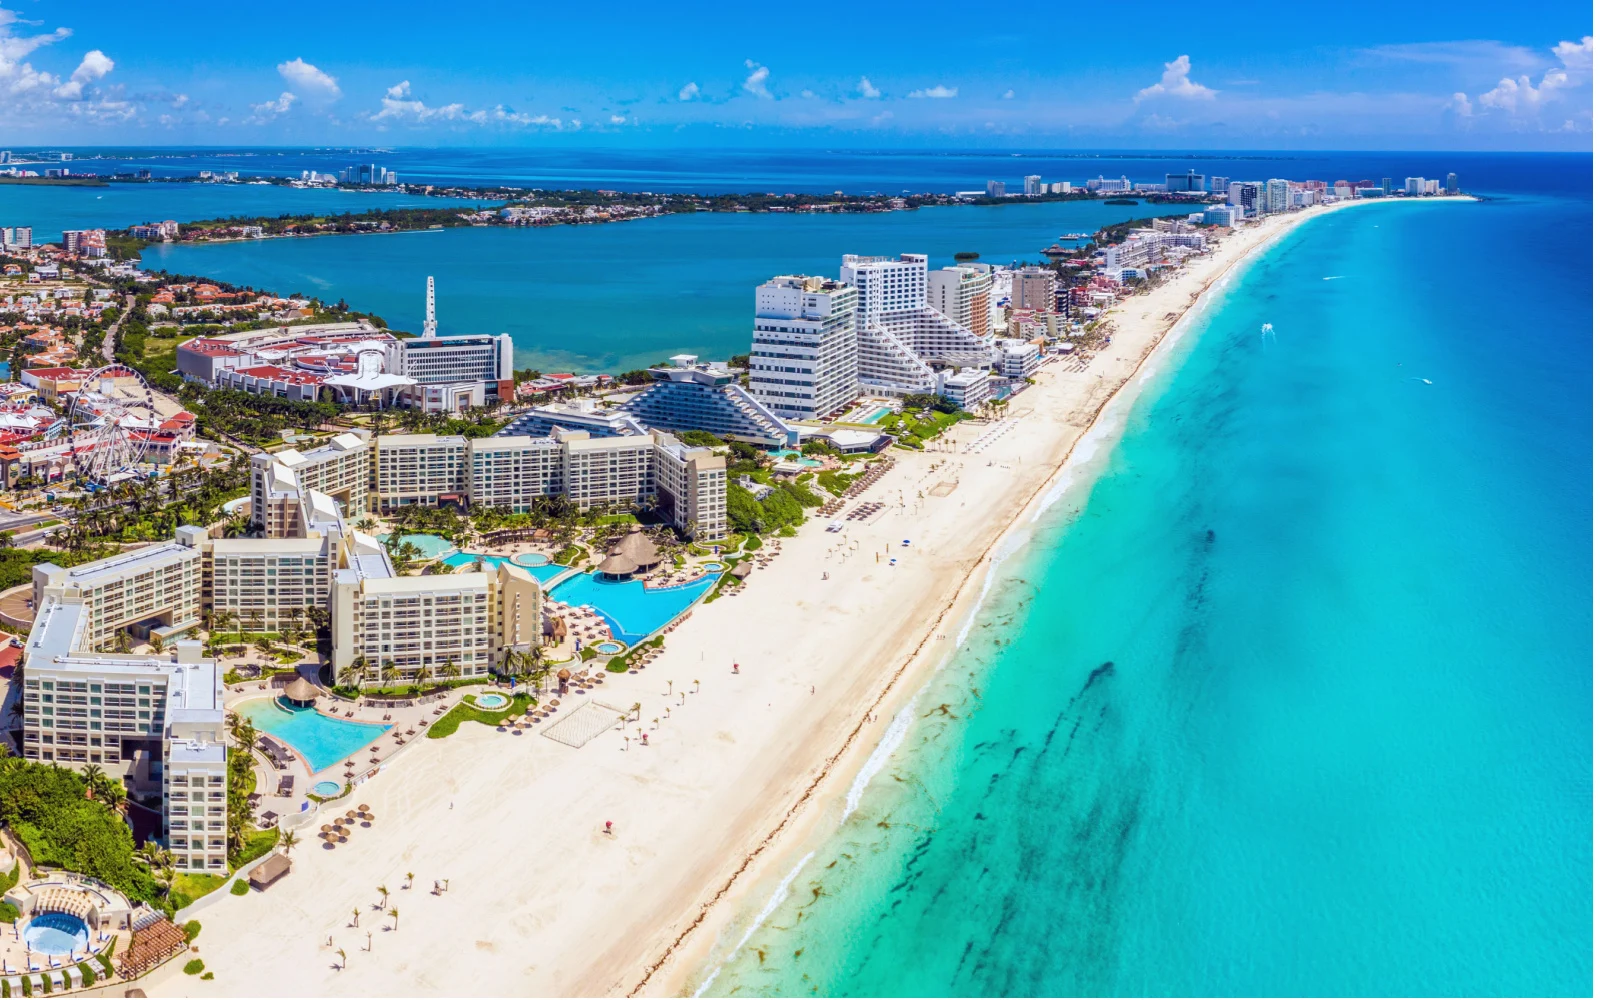 The 10 Best Adults-Only All-Inclusive Resorts in Cancun